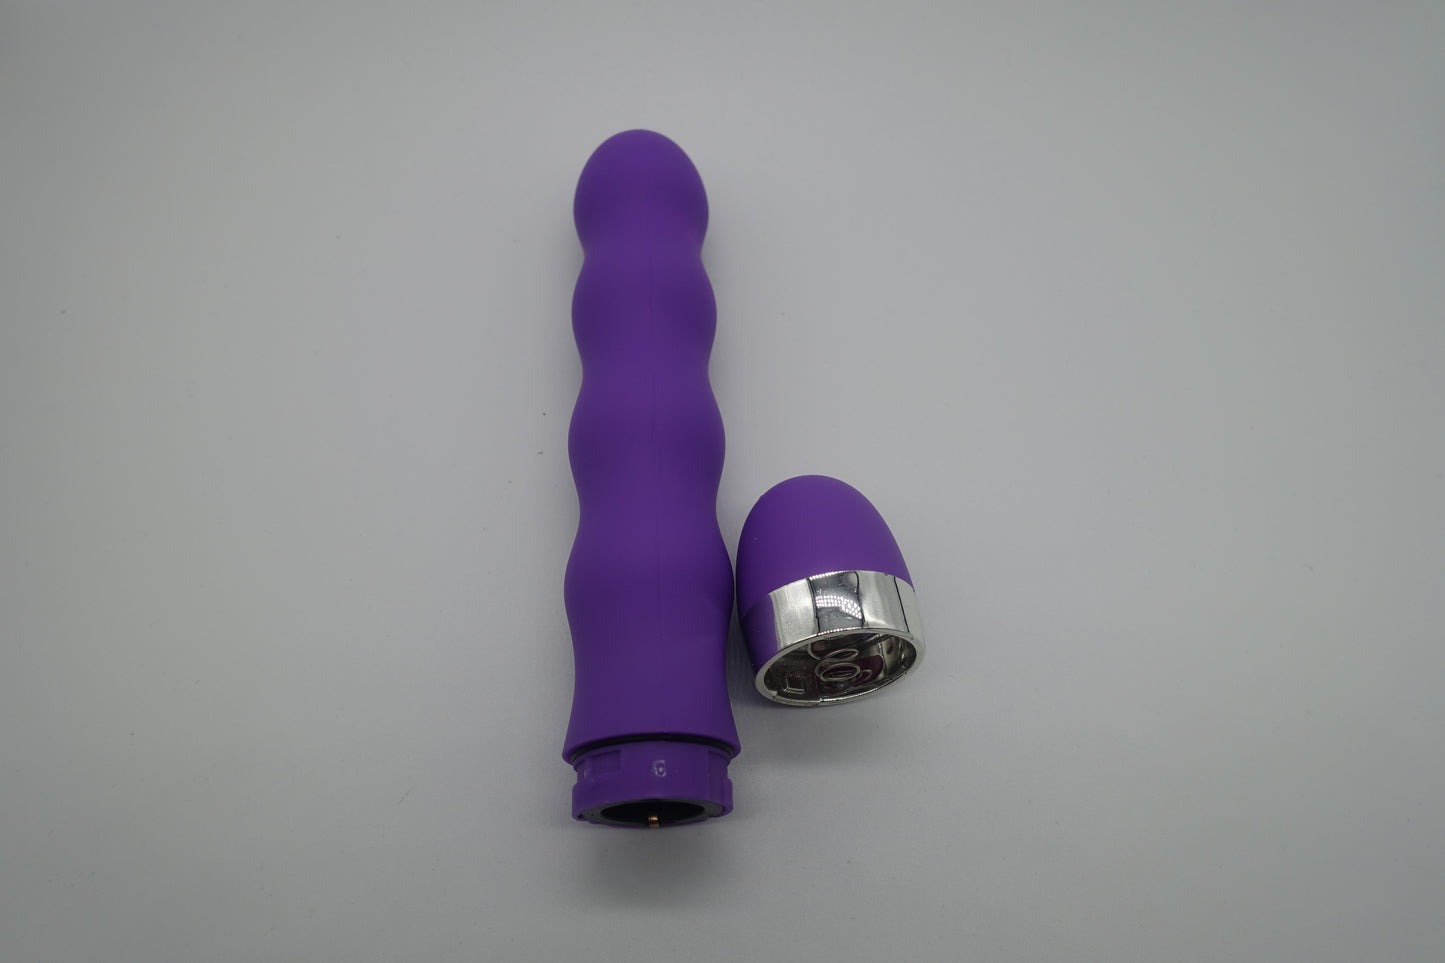 Vibrator wrinkled electric toy purple